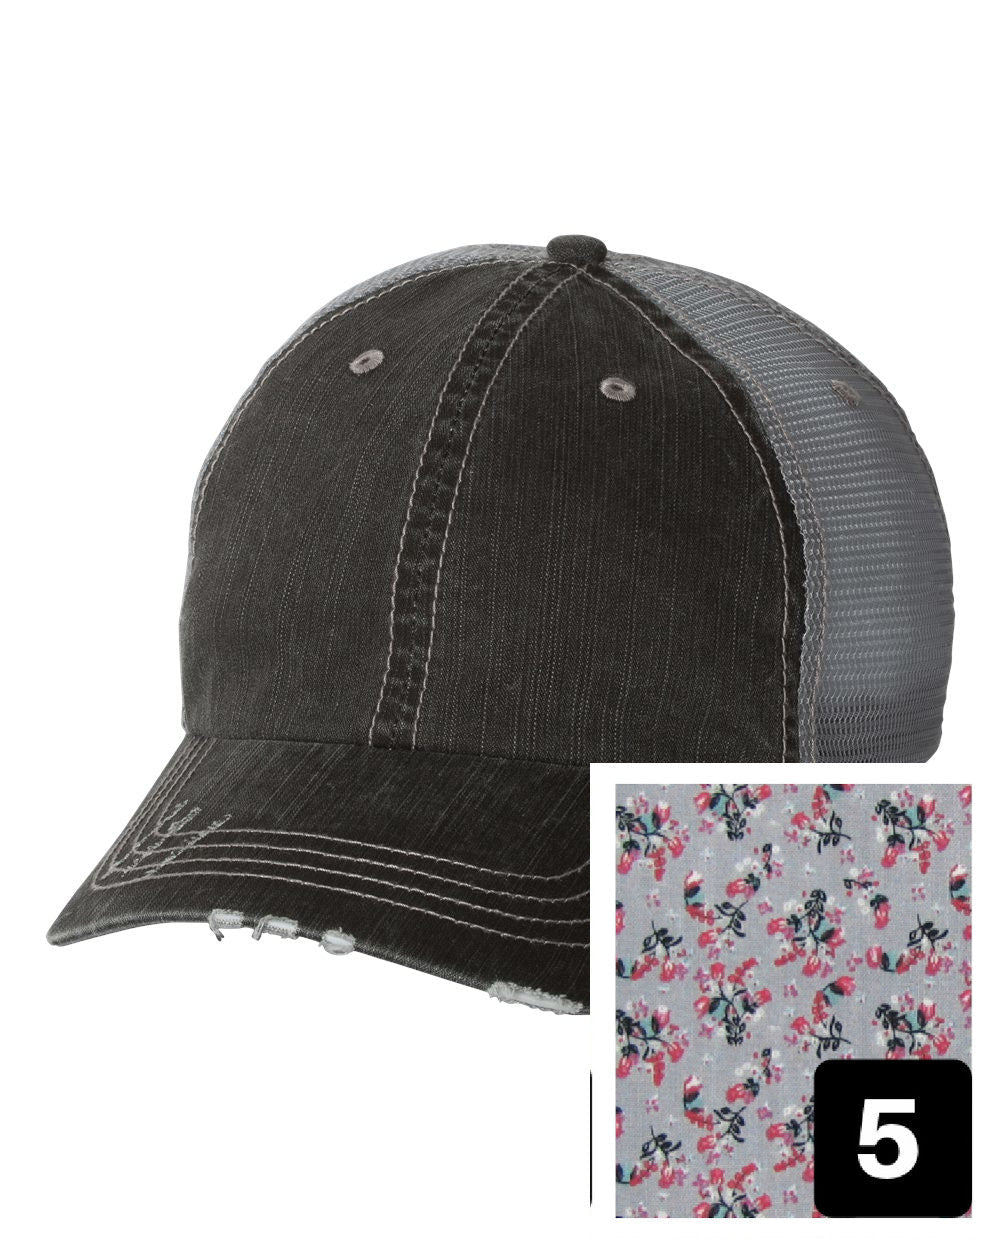 gray distressed trucker hat with purple and pink floral fabric state of Florida